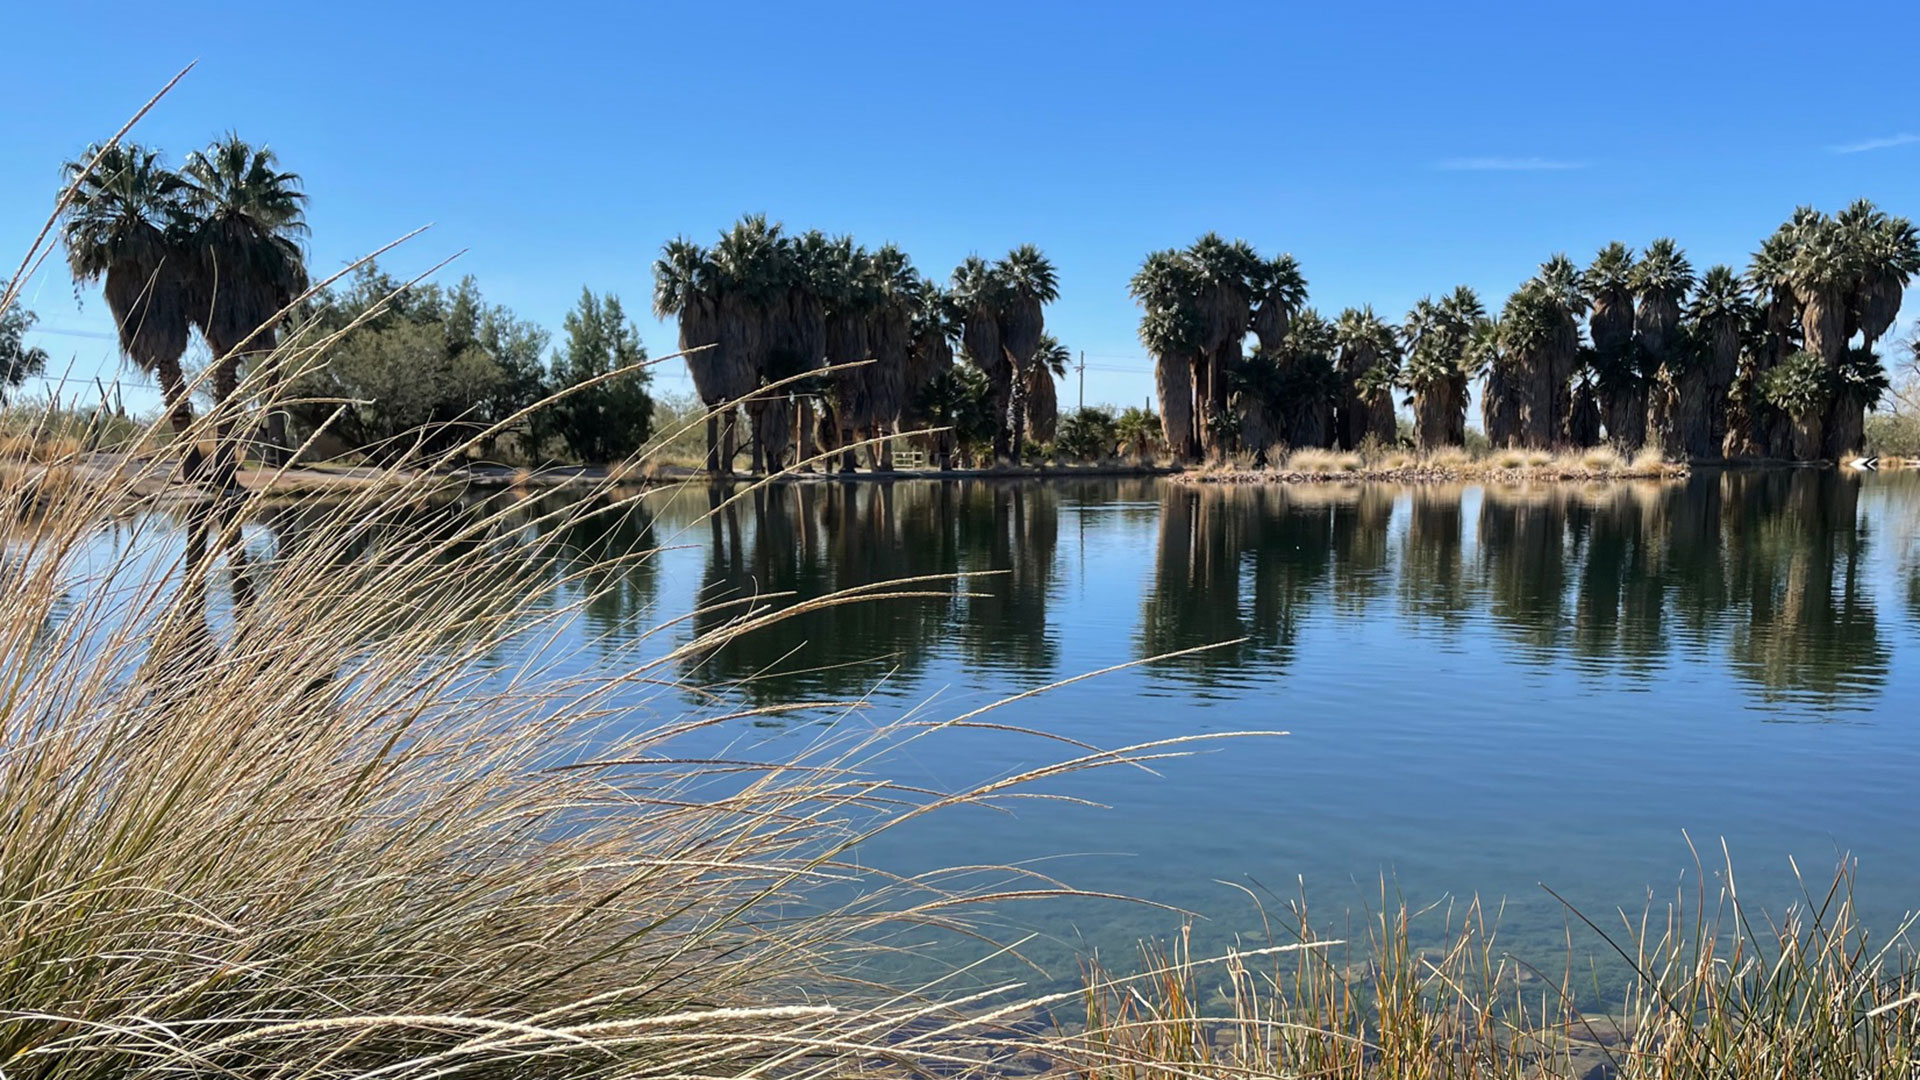 Agua Caliente Park is a Pima County destination located east of Tucson city limits. Visitors often describe it as a "desert oasis" for the community. 